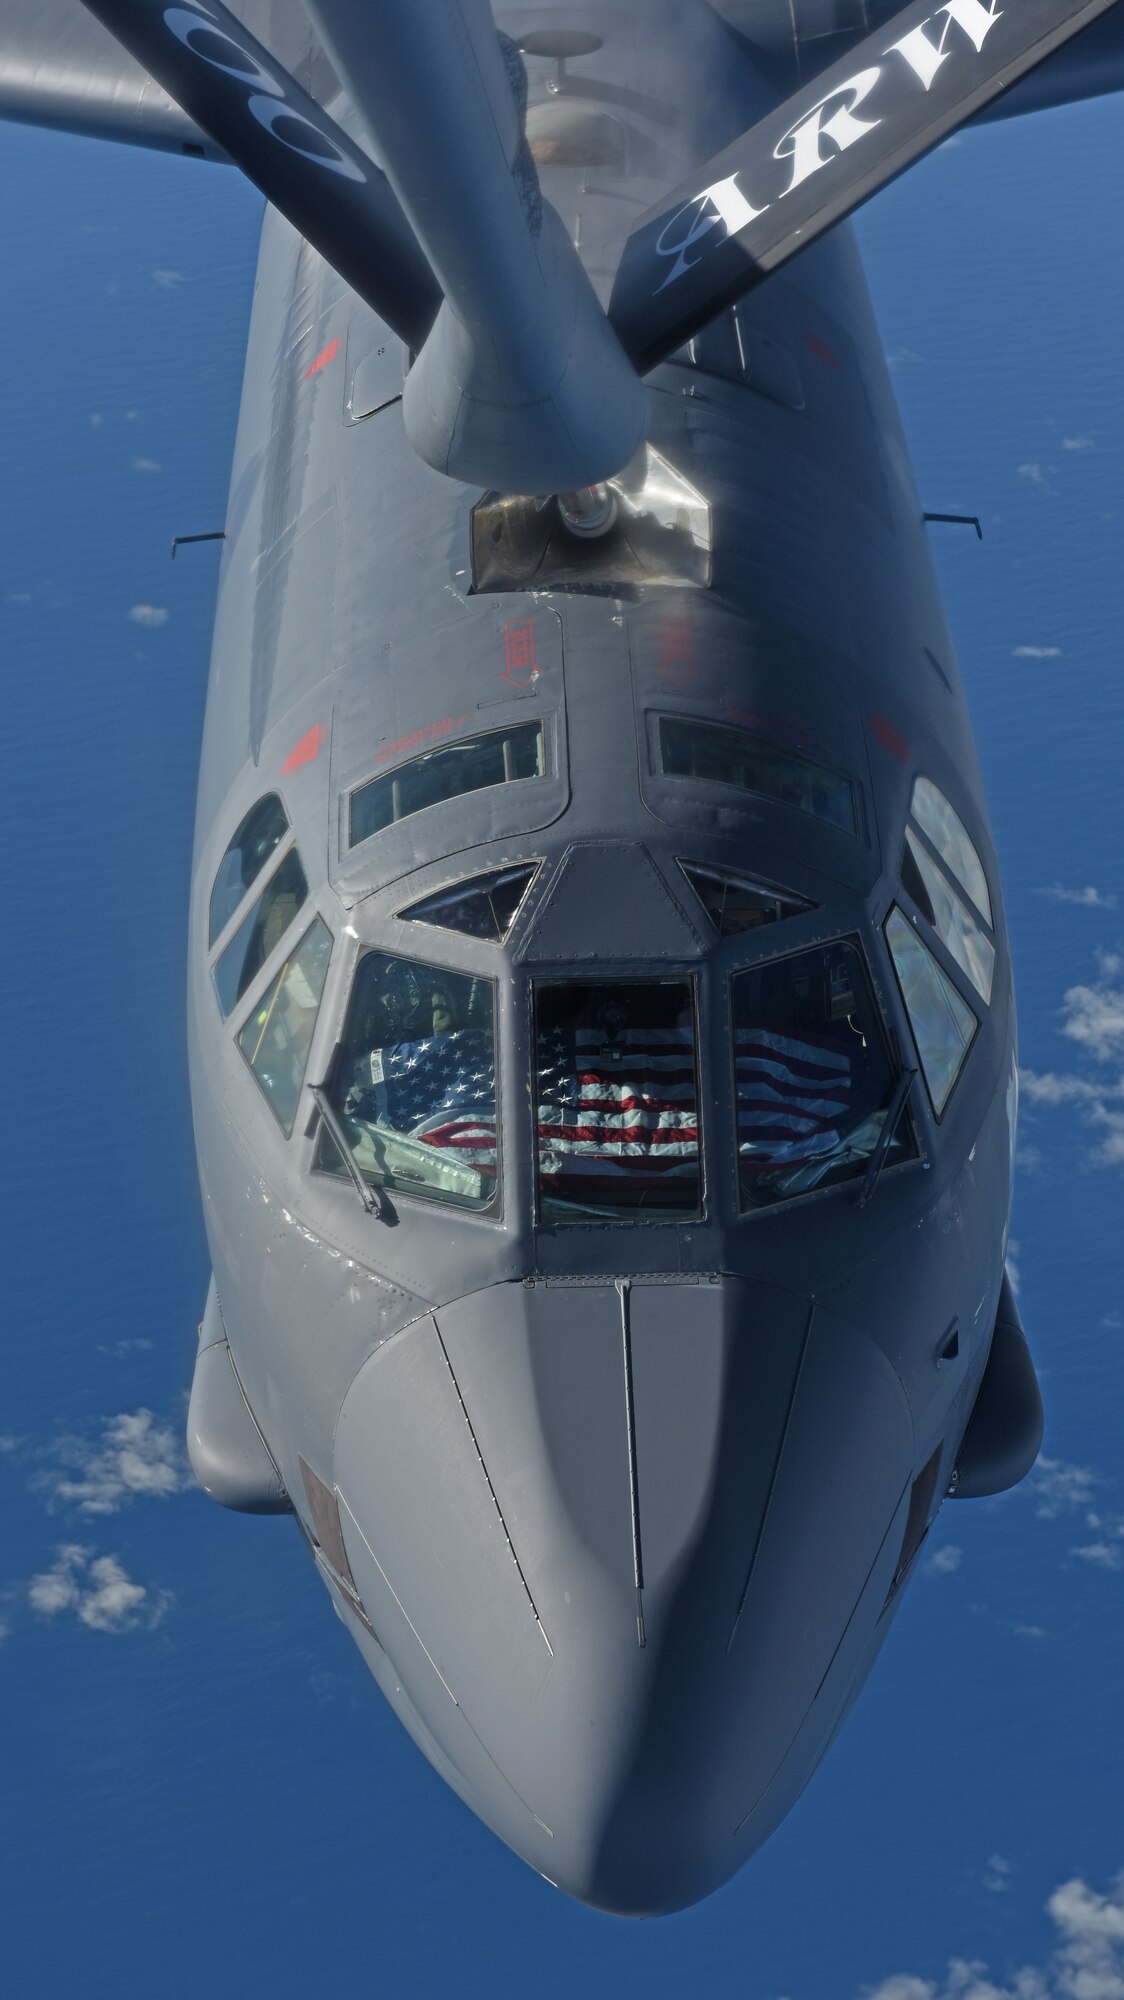 A U.S. Air Force B-52 Stratofortress receives fuel from a U.S. Air Force KC-135 Stratotanker during an air-refueling mission off the coast of Norway, Sept. 15, 2018. The purpose of the flight was to conduct theater familiarization for aircrew members and to demonstrate U.S. commitment to allies and partners through the global employment of our military forces. (U.S. Air Force photo by Senior Airman Luke Milano)